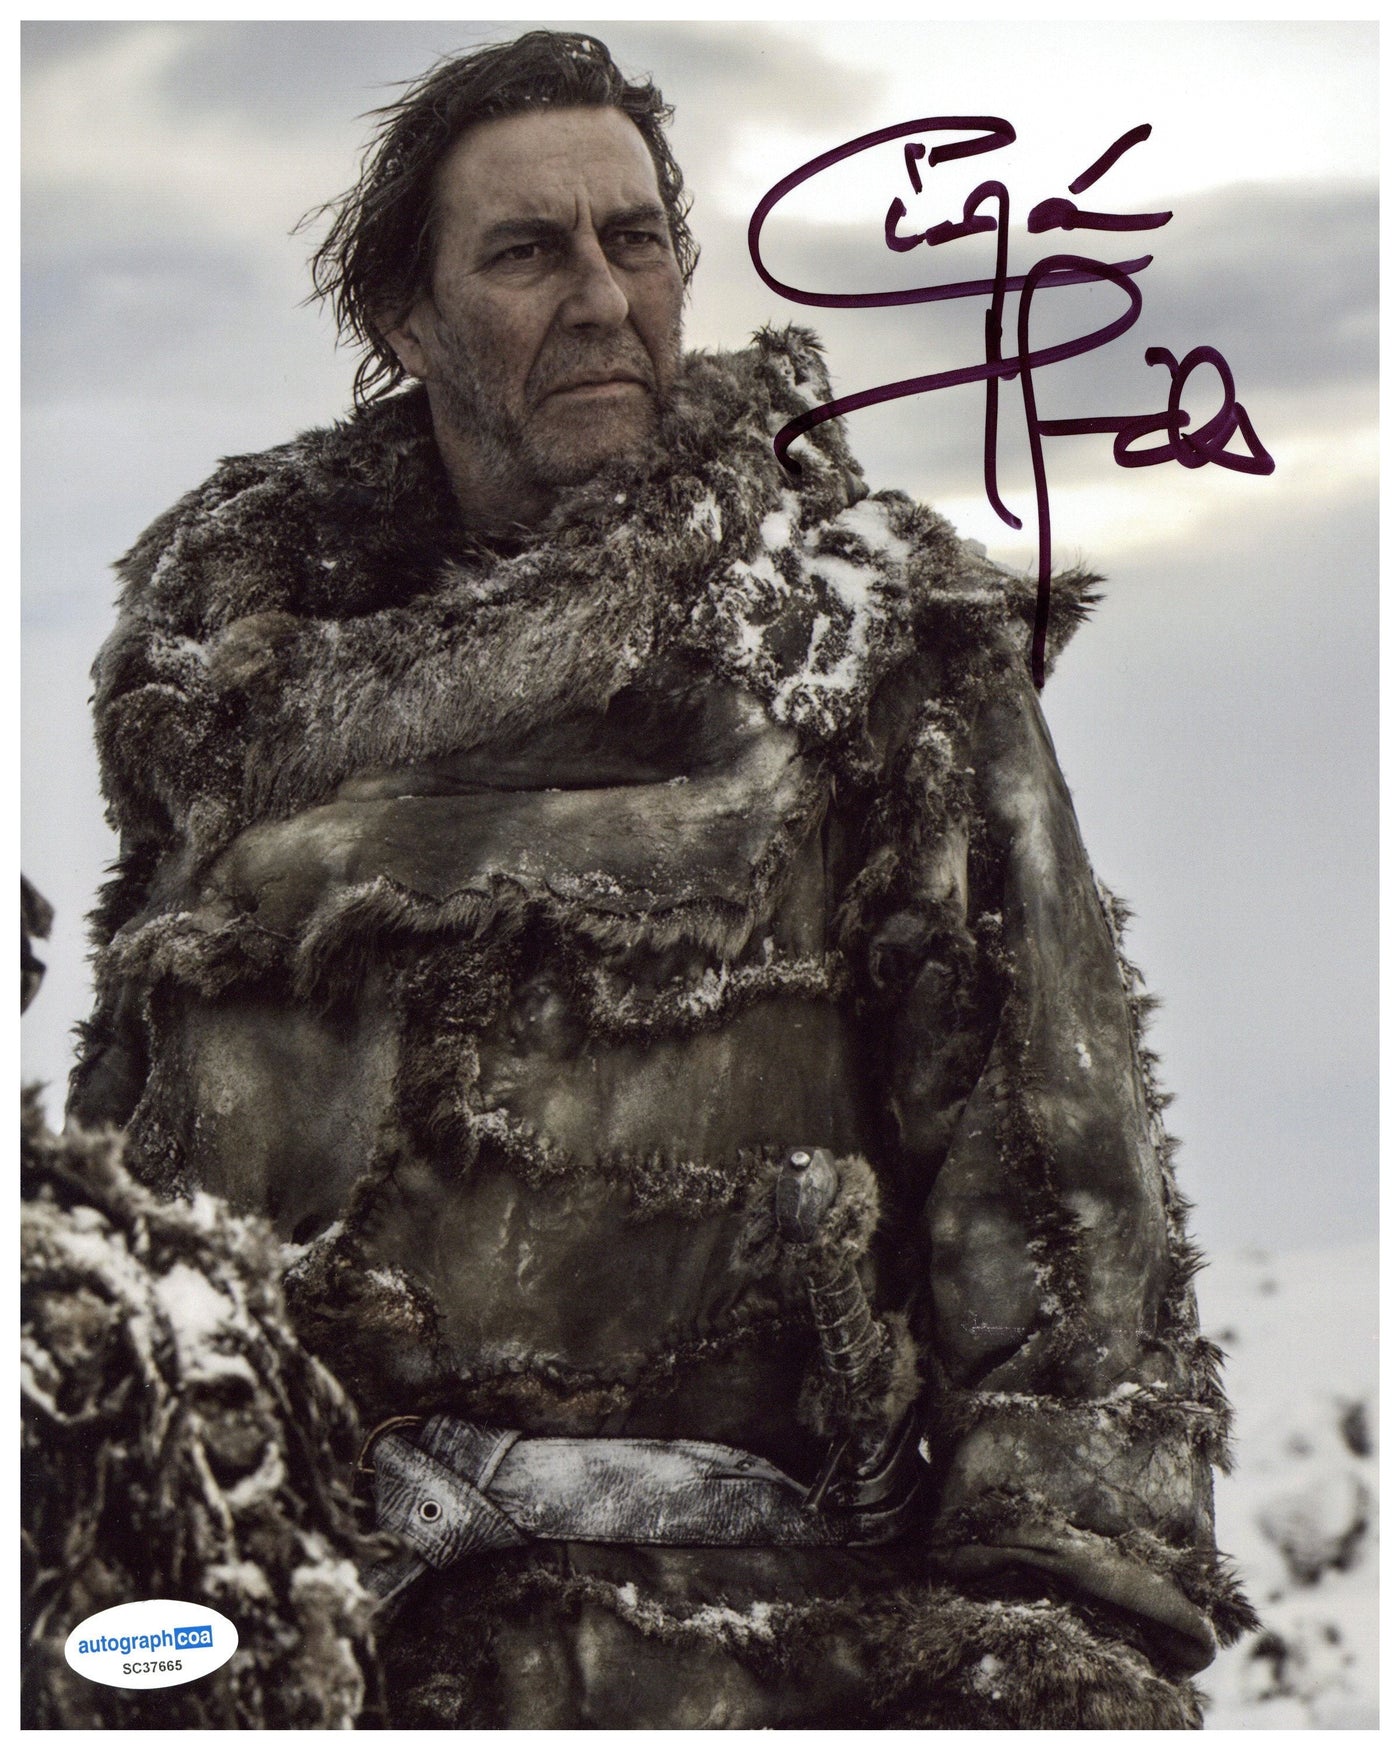 Ciarán Hinds Signed 8x10 Photo Game of Thrones Autographed Autograph COA